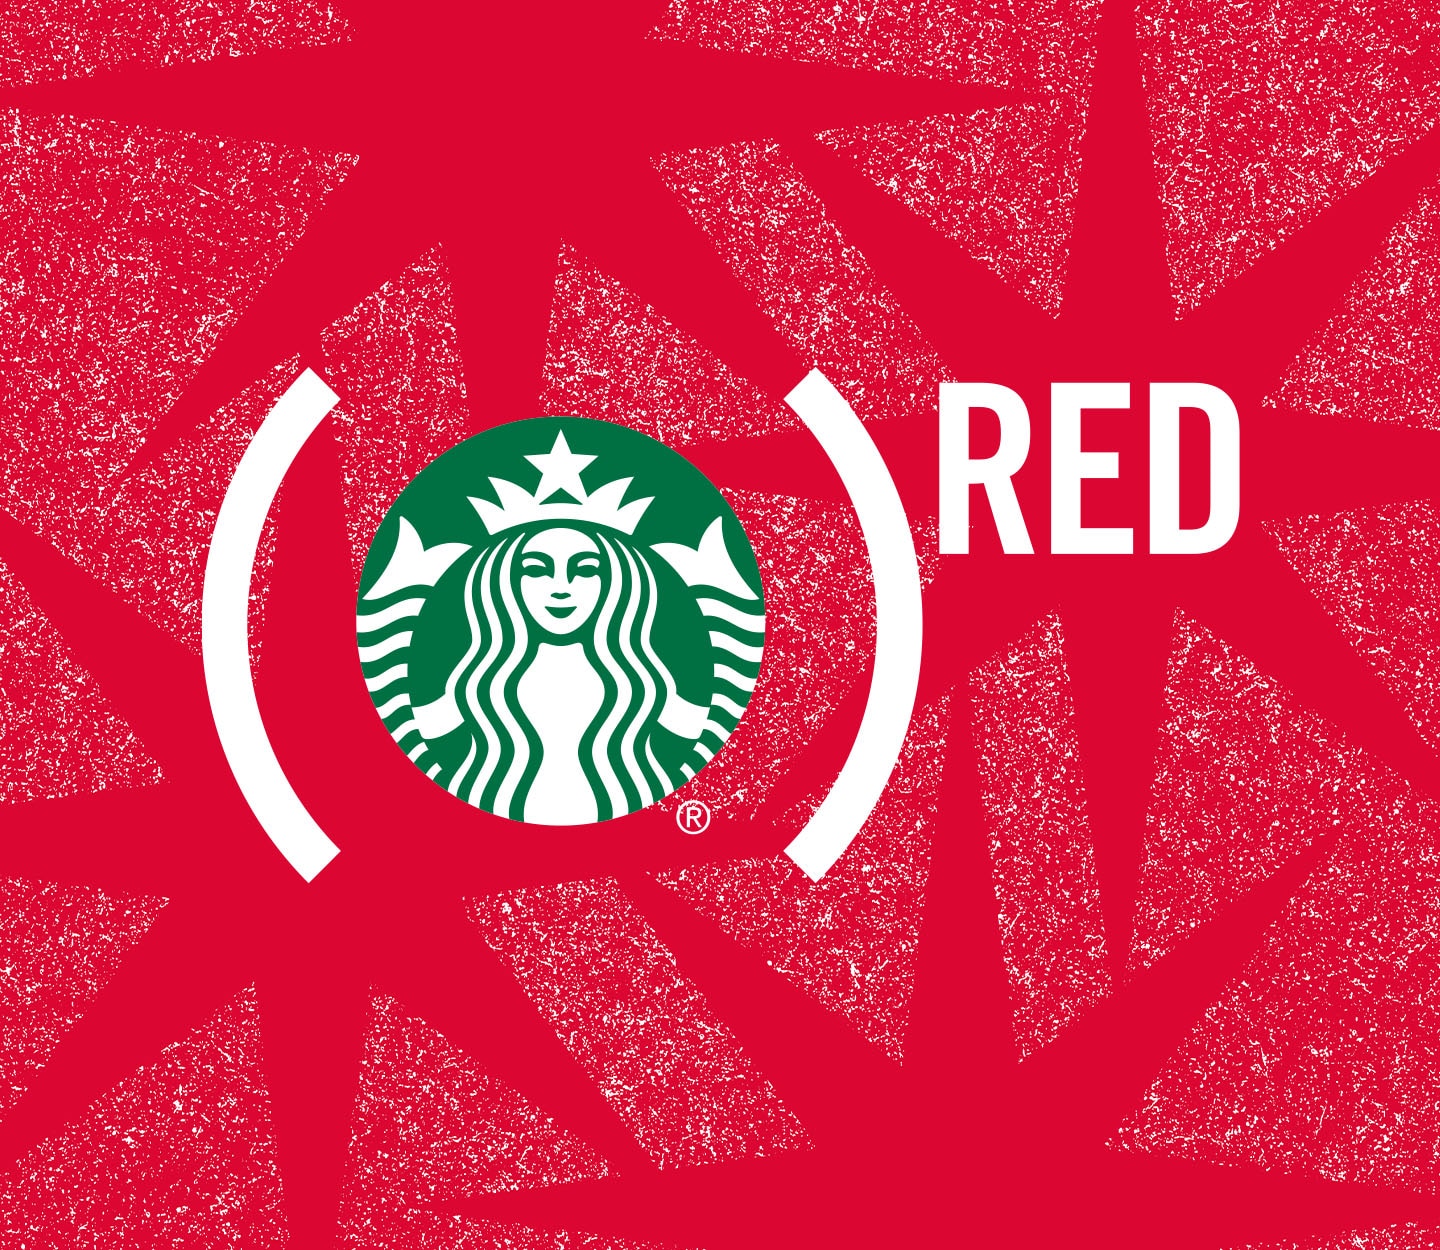 The Starbucks Siren logo paired with the (RED) logo against a festive red background.